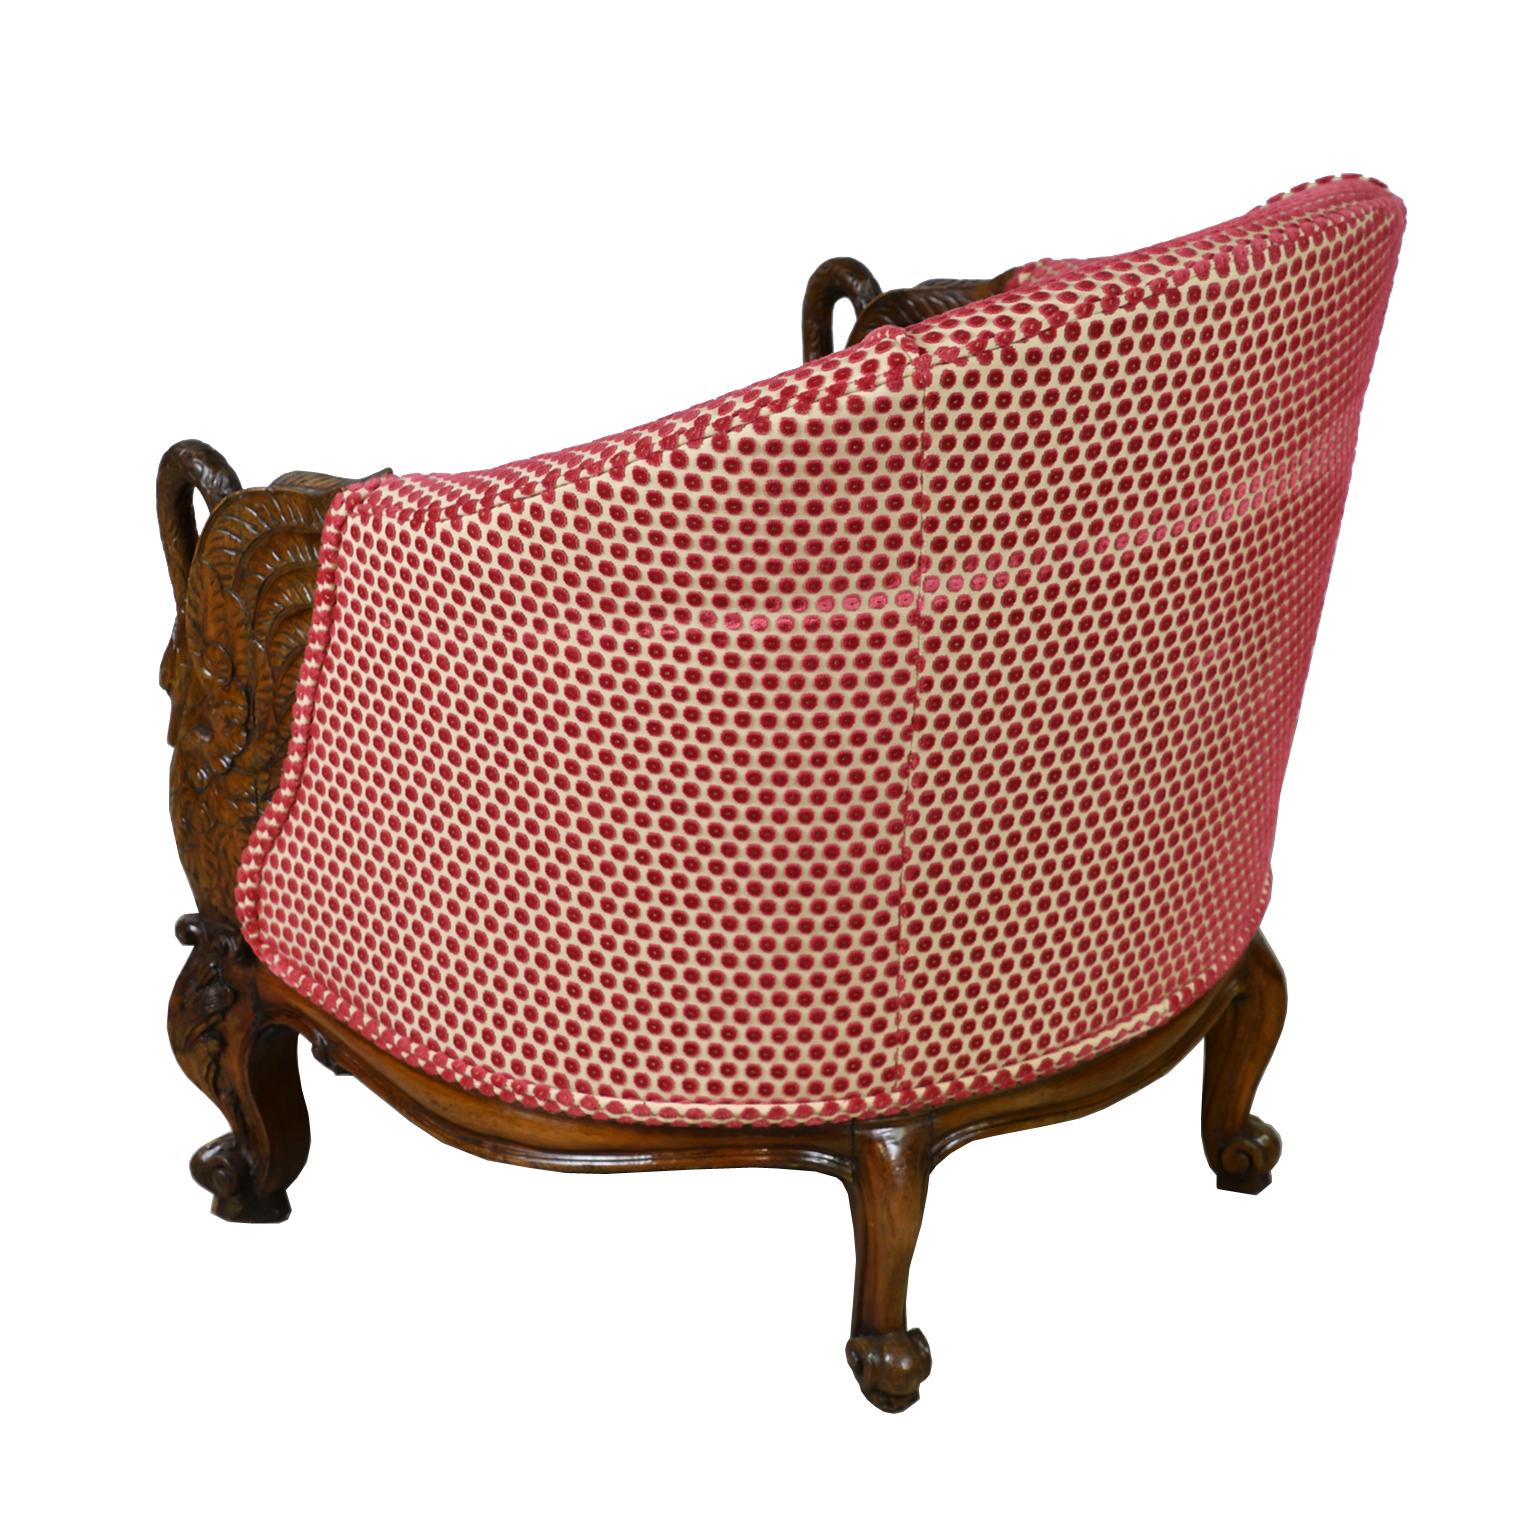 20th Century Belle Époque Upholstered Club Chair in Rose-Colored Cut Velvet with Carved Swans